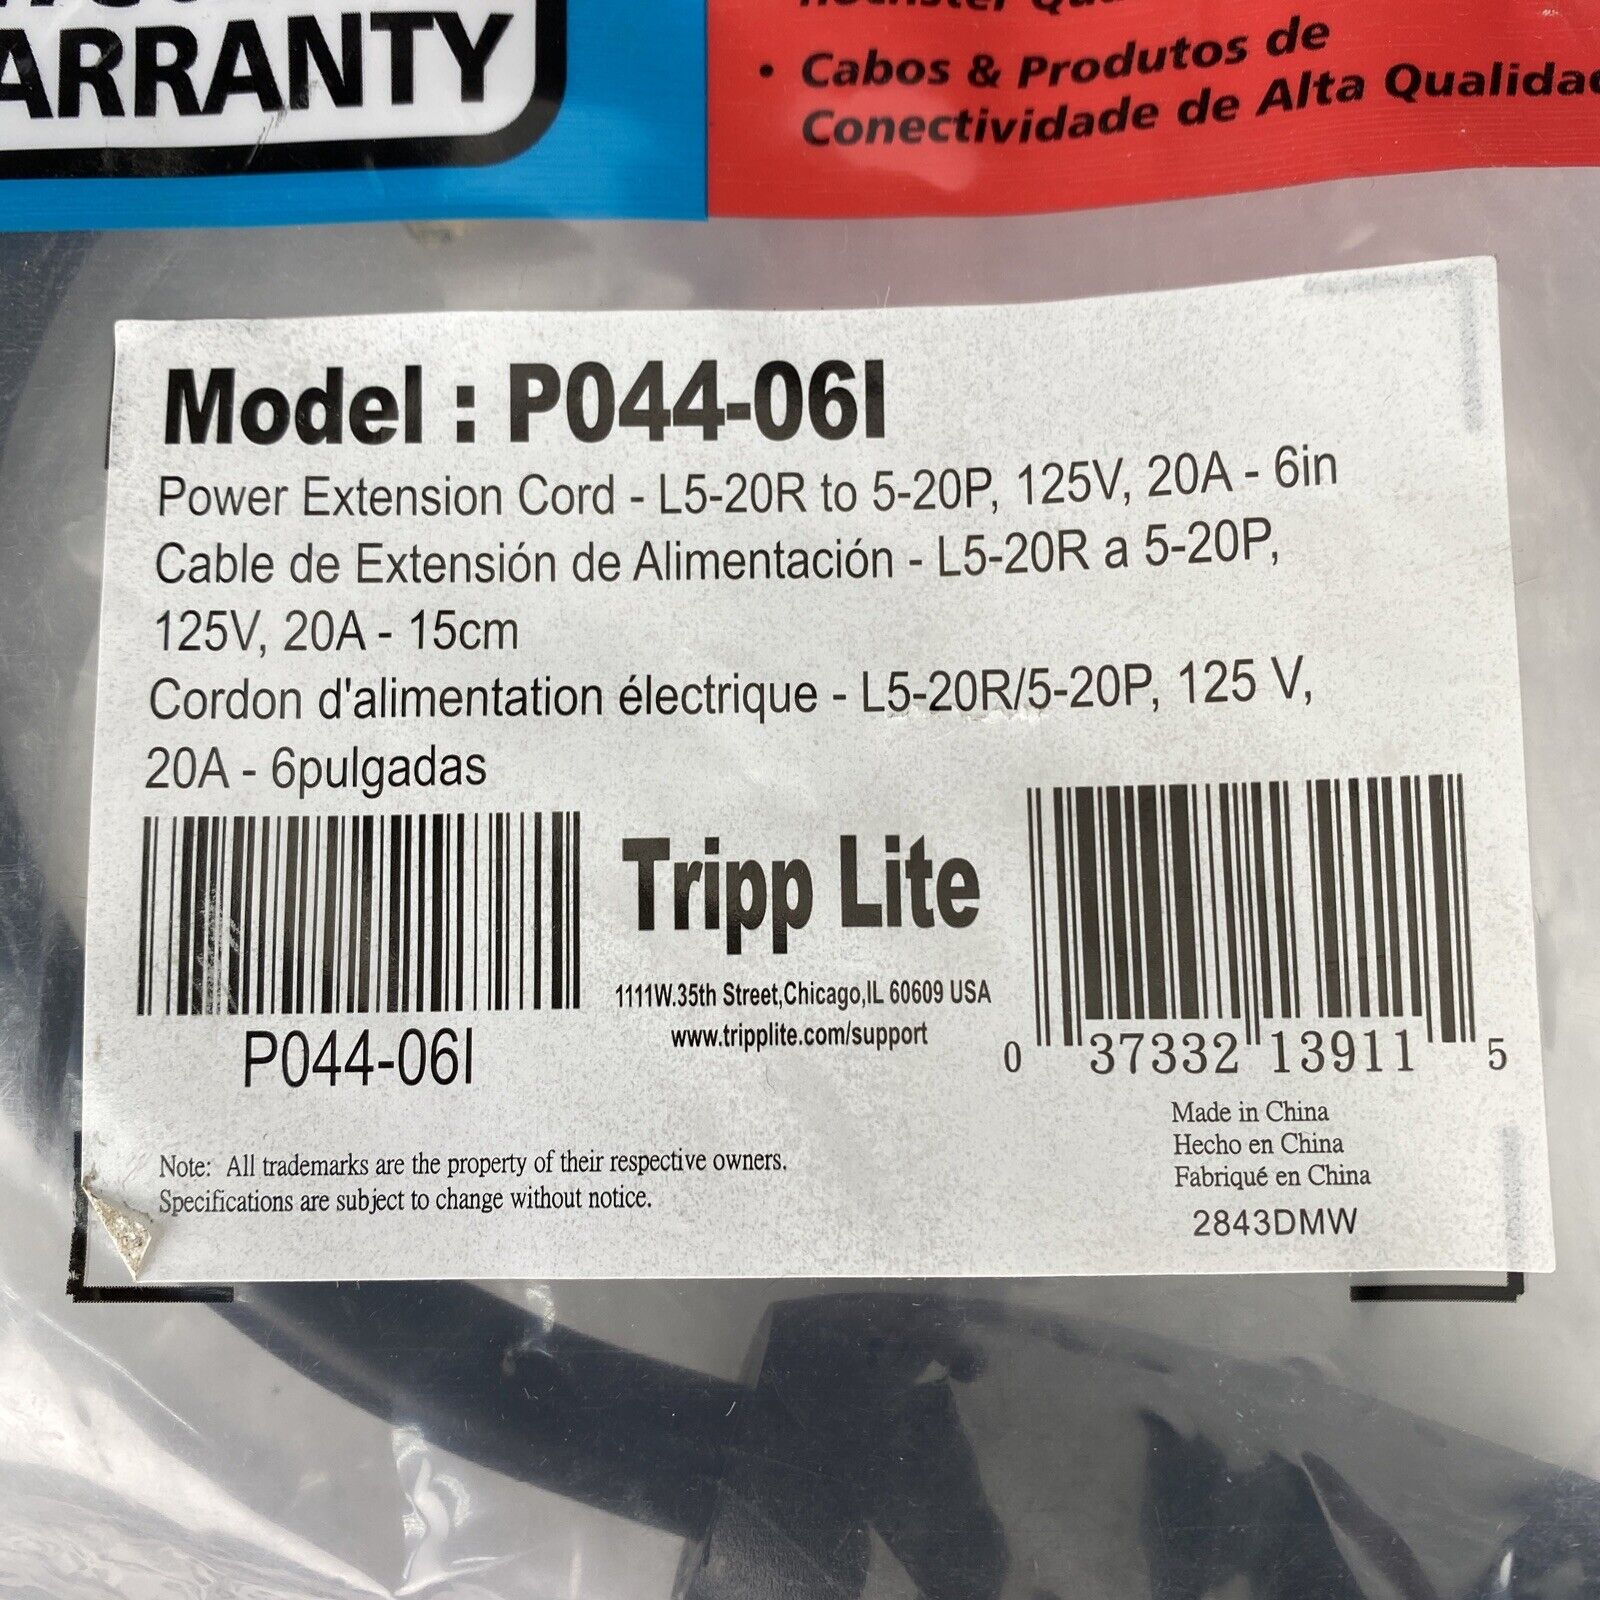 Lot of 2 Tripp Lite P044-06I Power Extension Cord L5-20R to 5-20P 125V 20A 6in